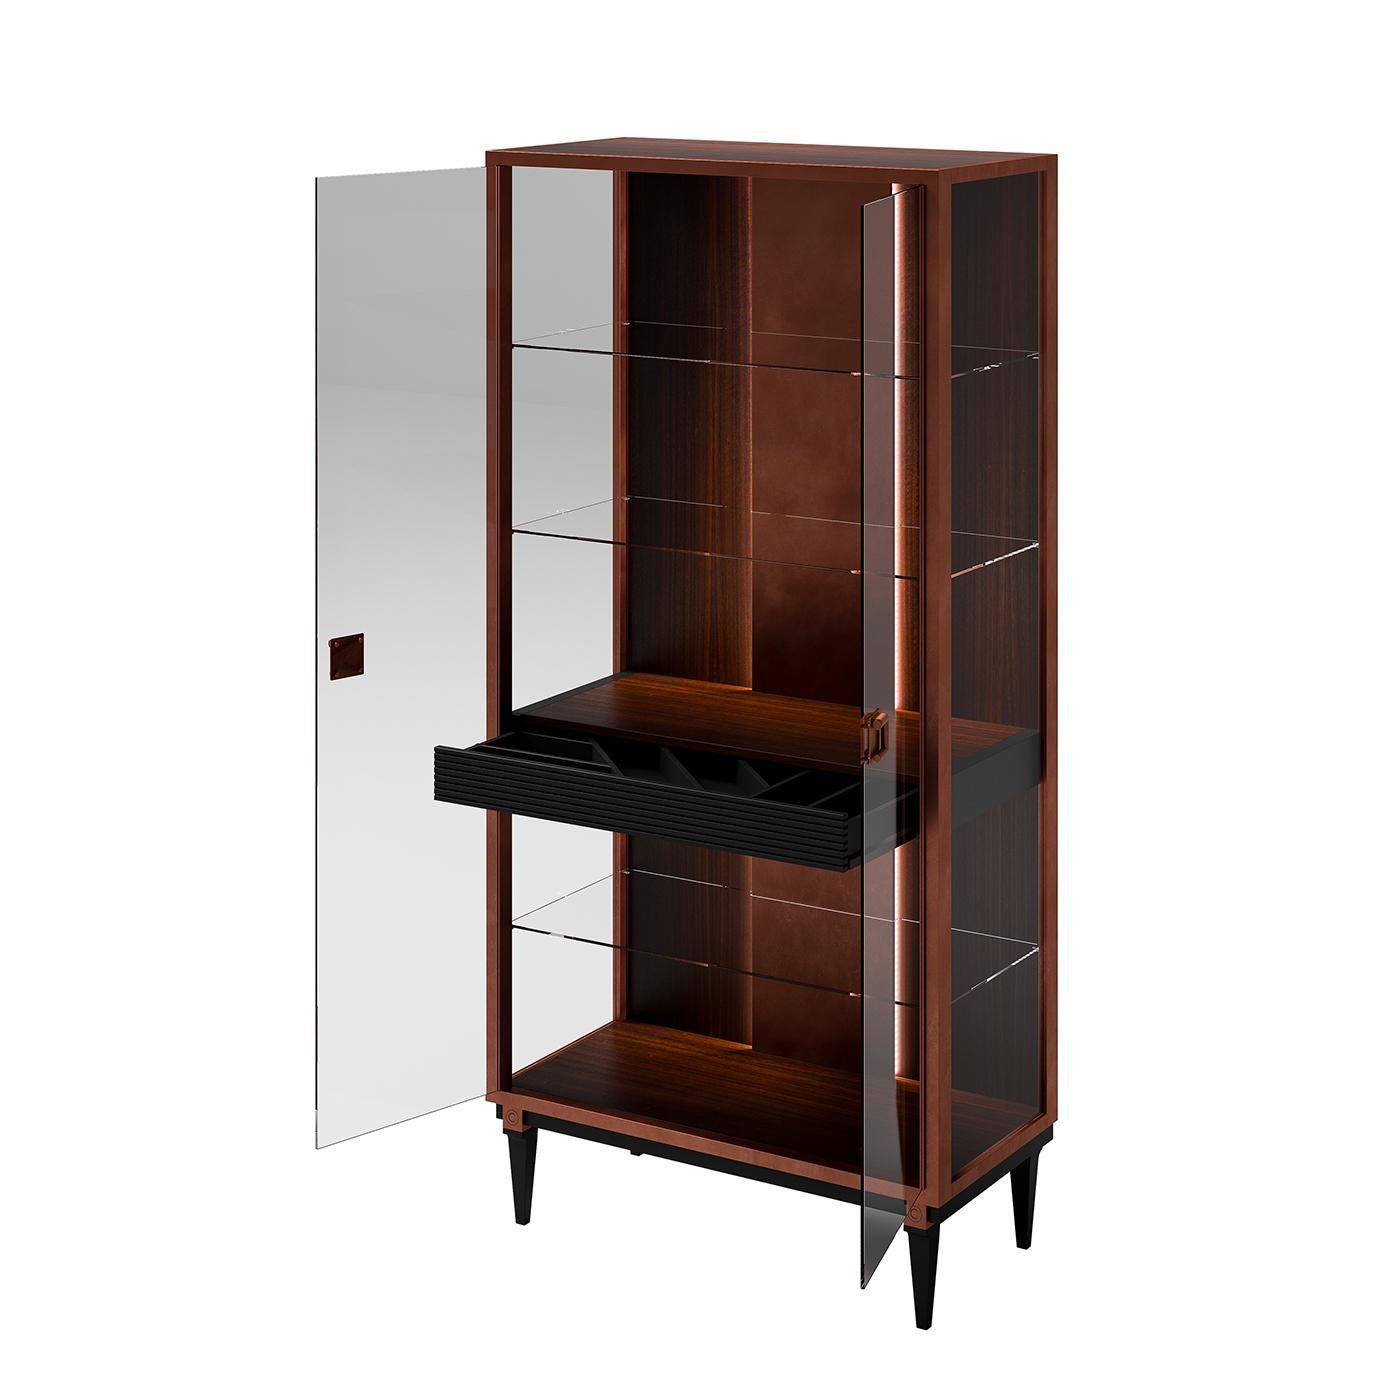 Inspired by the traditional china cabinets, this sophisticated display cabinet features a rectangular frame of forest eucalyptus veneer raised on four tapered legs with a black finish. Both sides and doors have glass panels. Inside the cabinet is